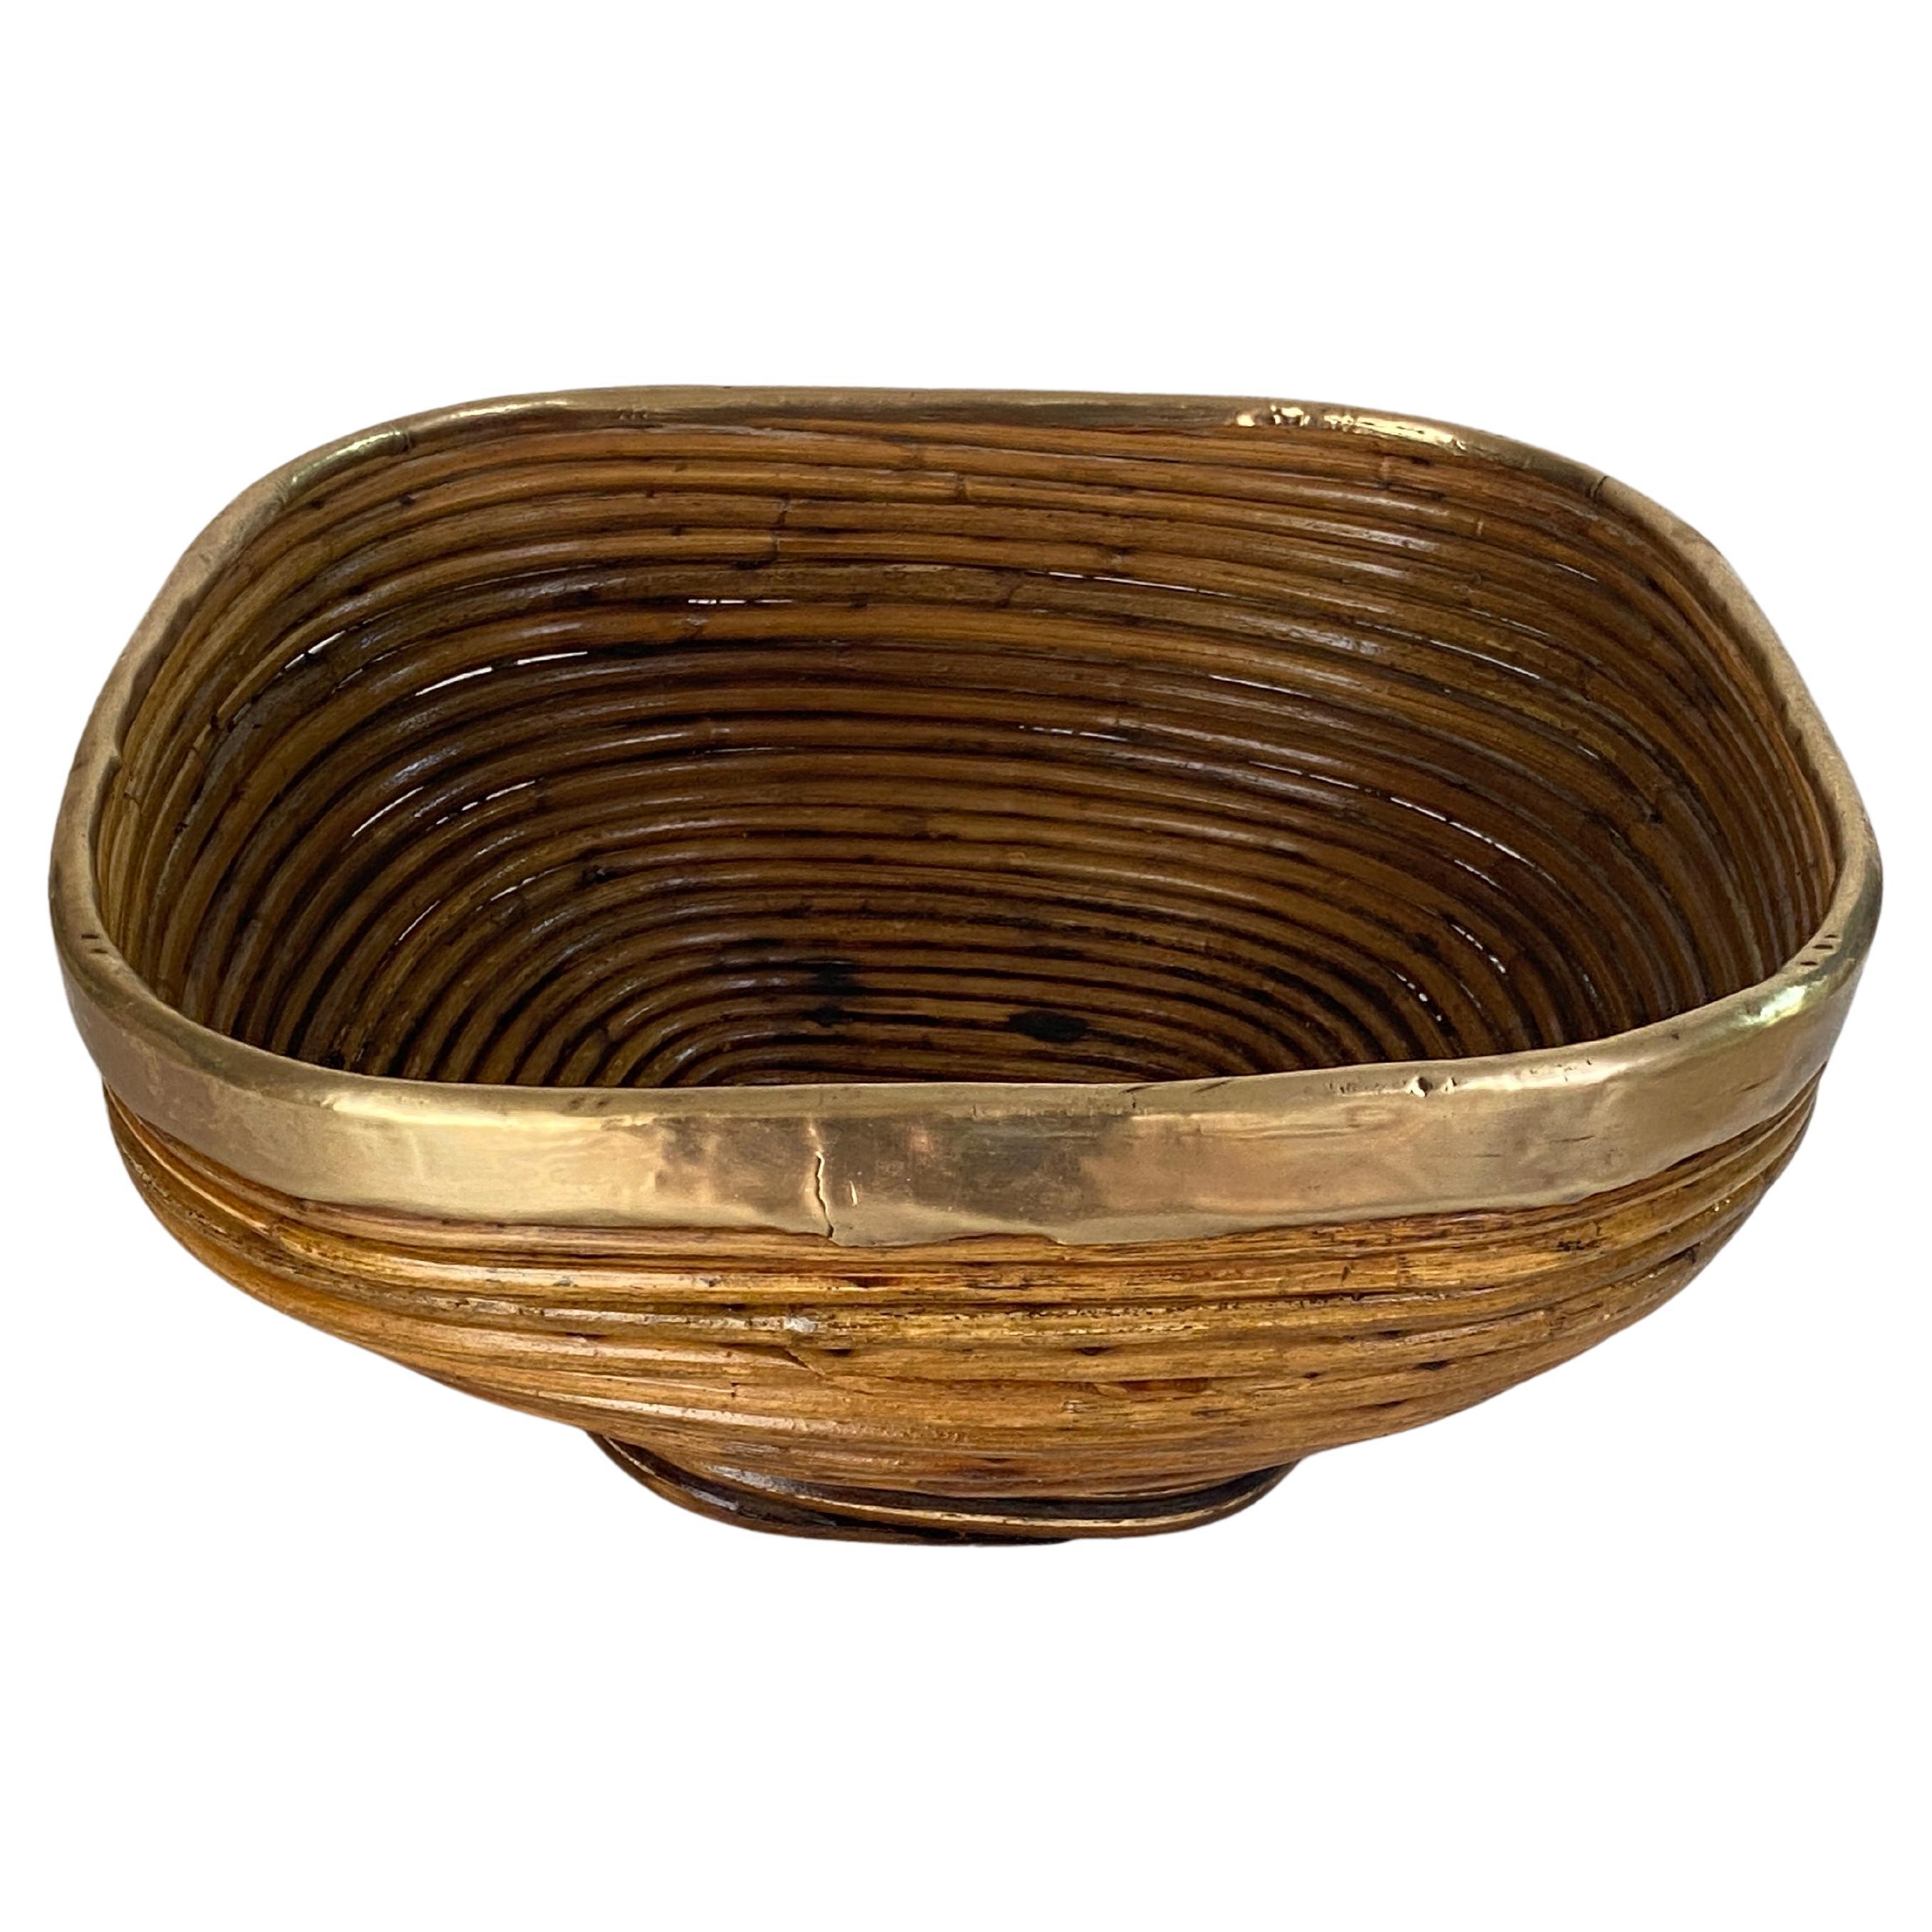 Rattan and Brass Italian Large Basket Bowl Centerpiece, 1970s Crespi Style In Good Condition For Sale In Auribeau sur Siagne, FR